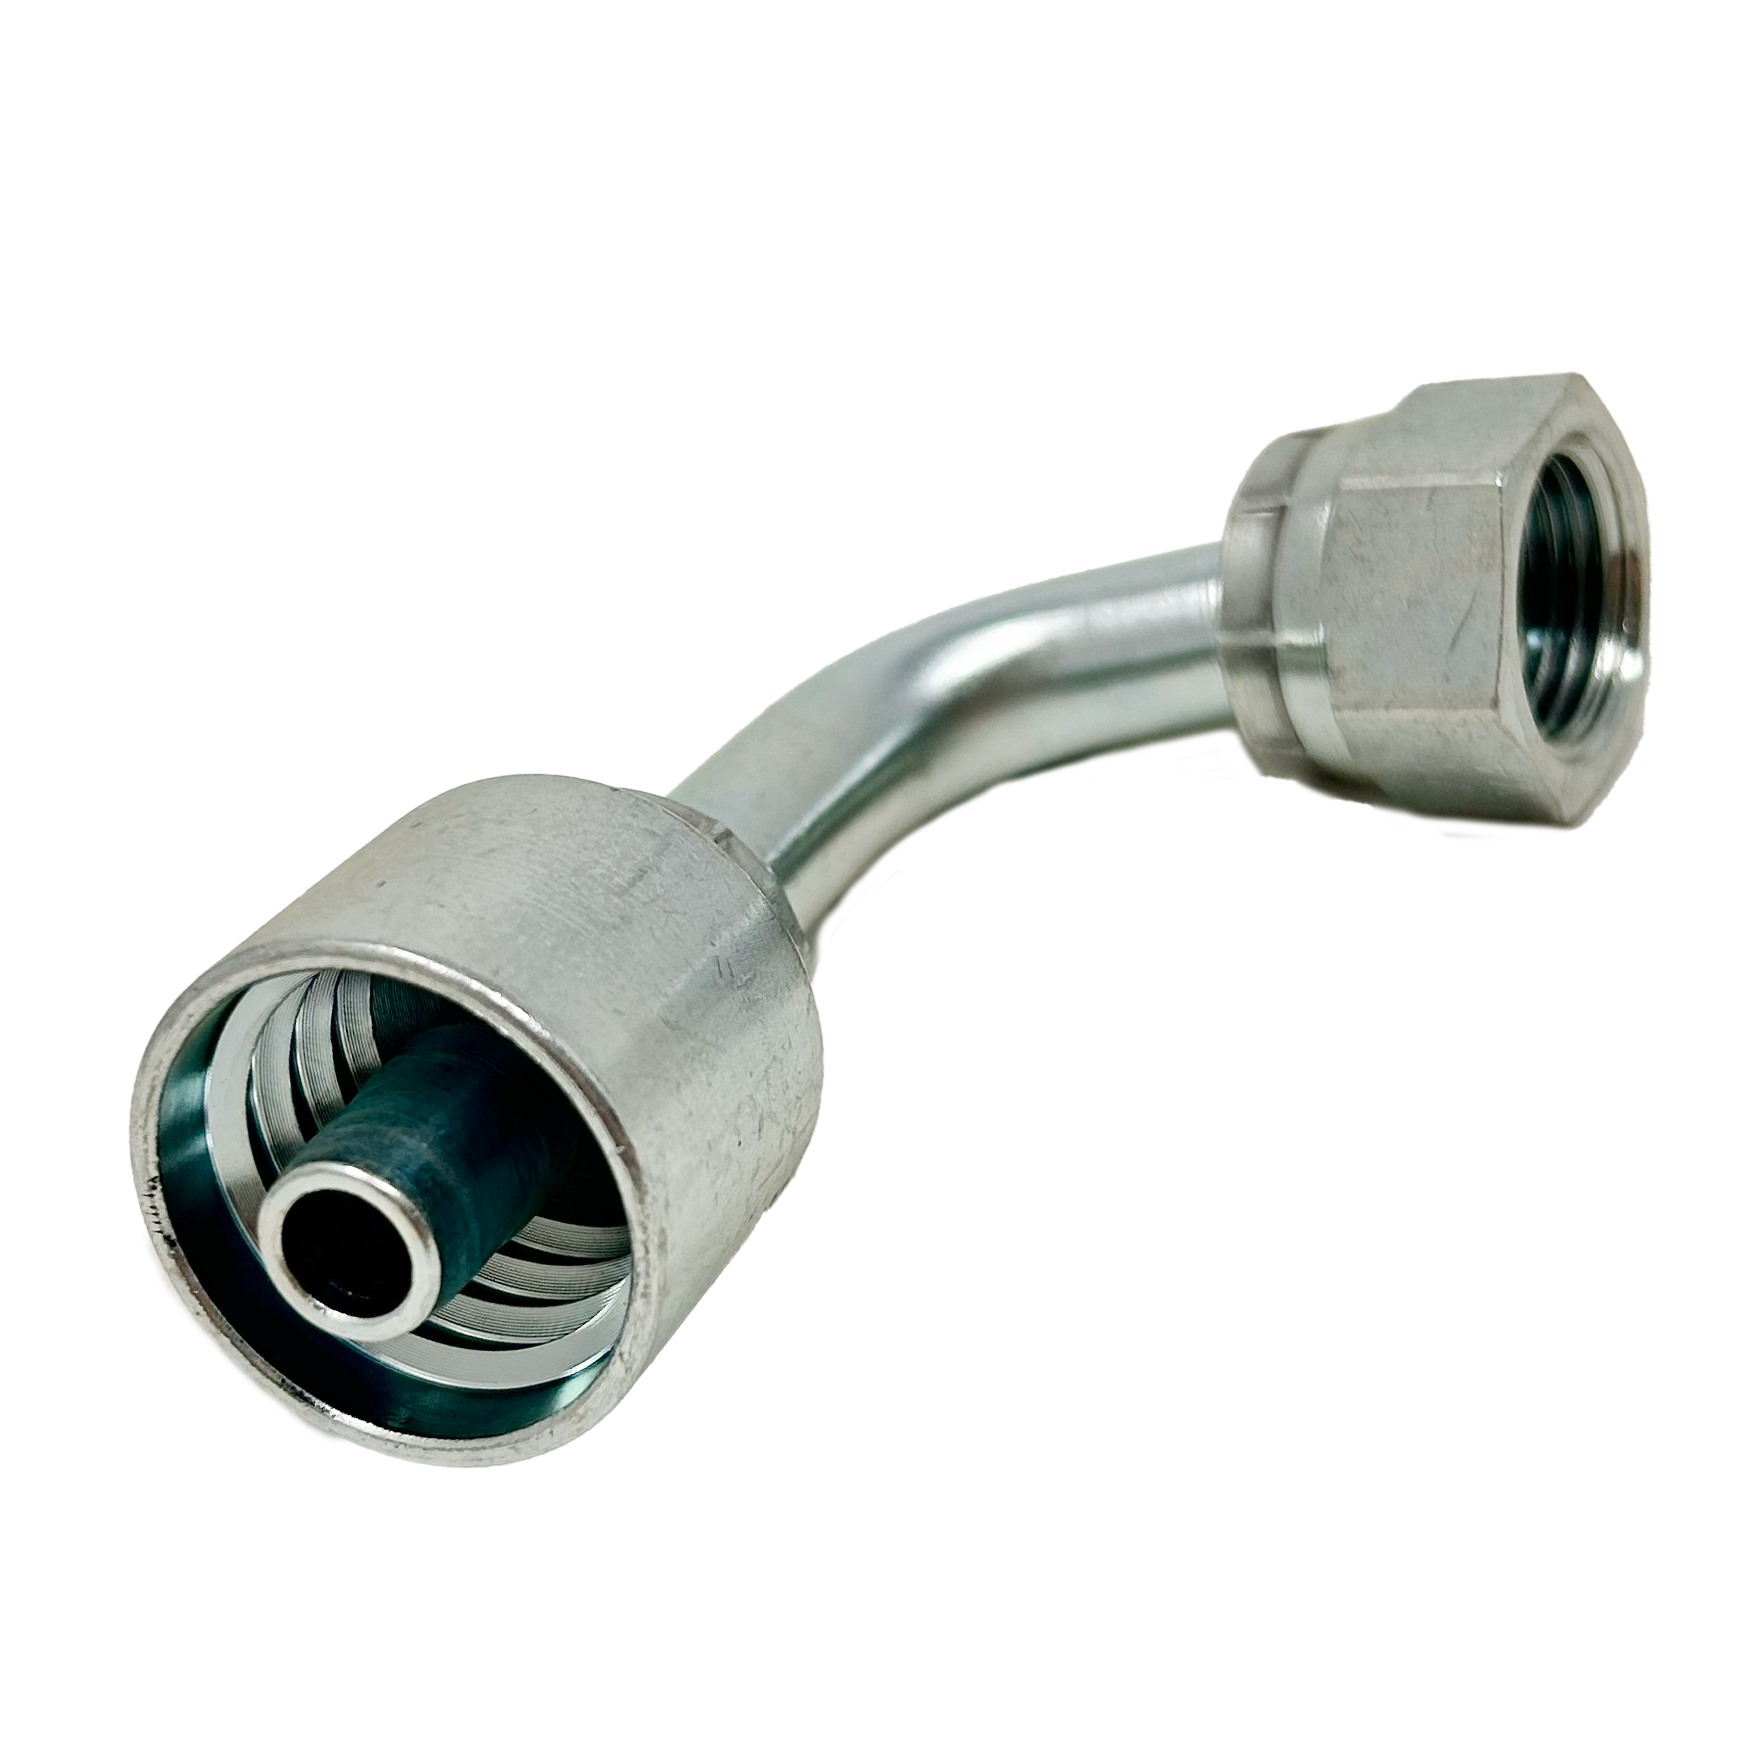 B2-OFFX90-0608: Continental Hose Fitting, 0.375 (3/8") Hose ID x 13/16-16 Female ORFS, 90-Degree Swivel Connection